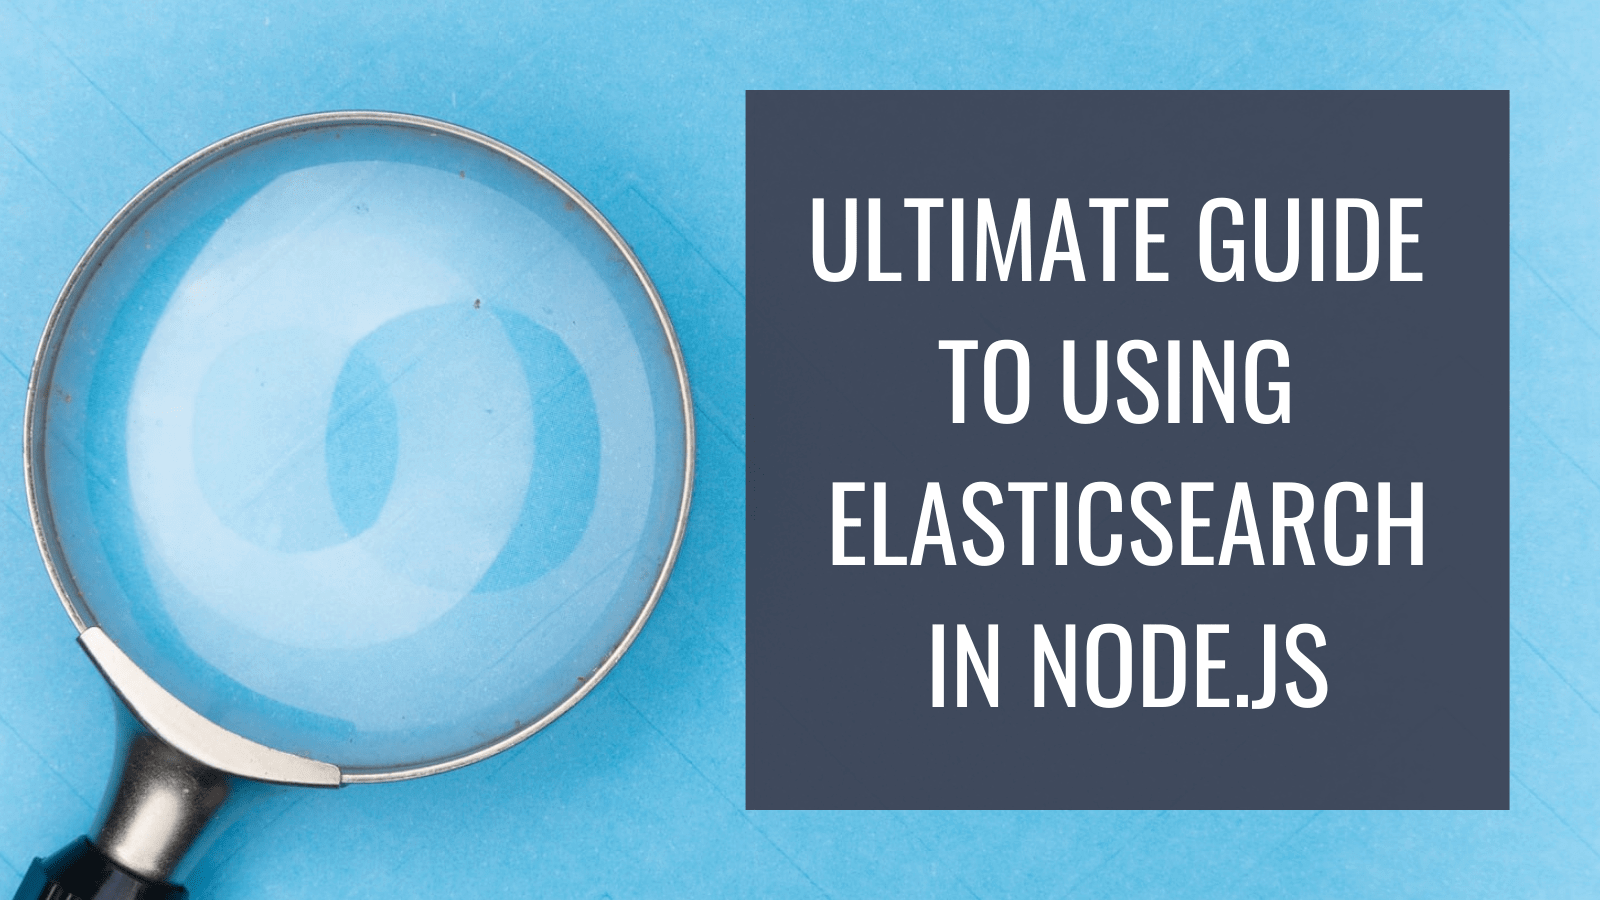 The Ultimate Guide to Using Elasticsearch in Node.js